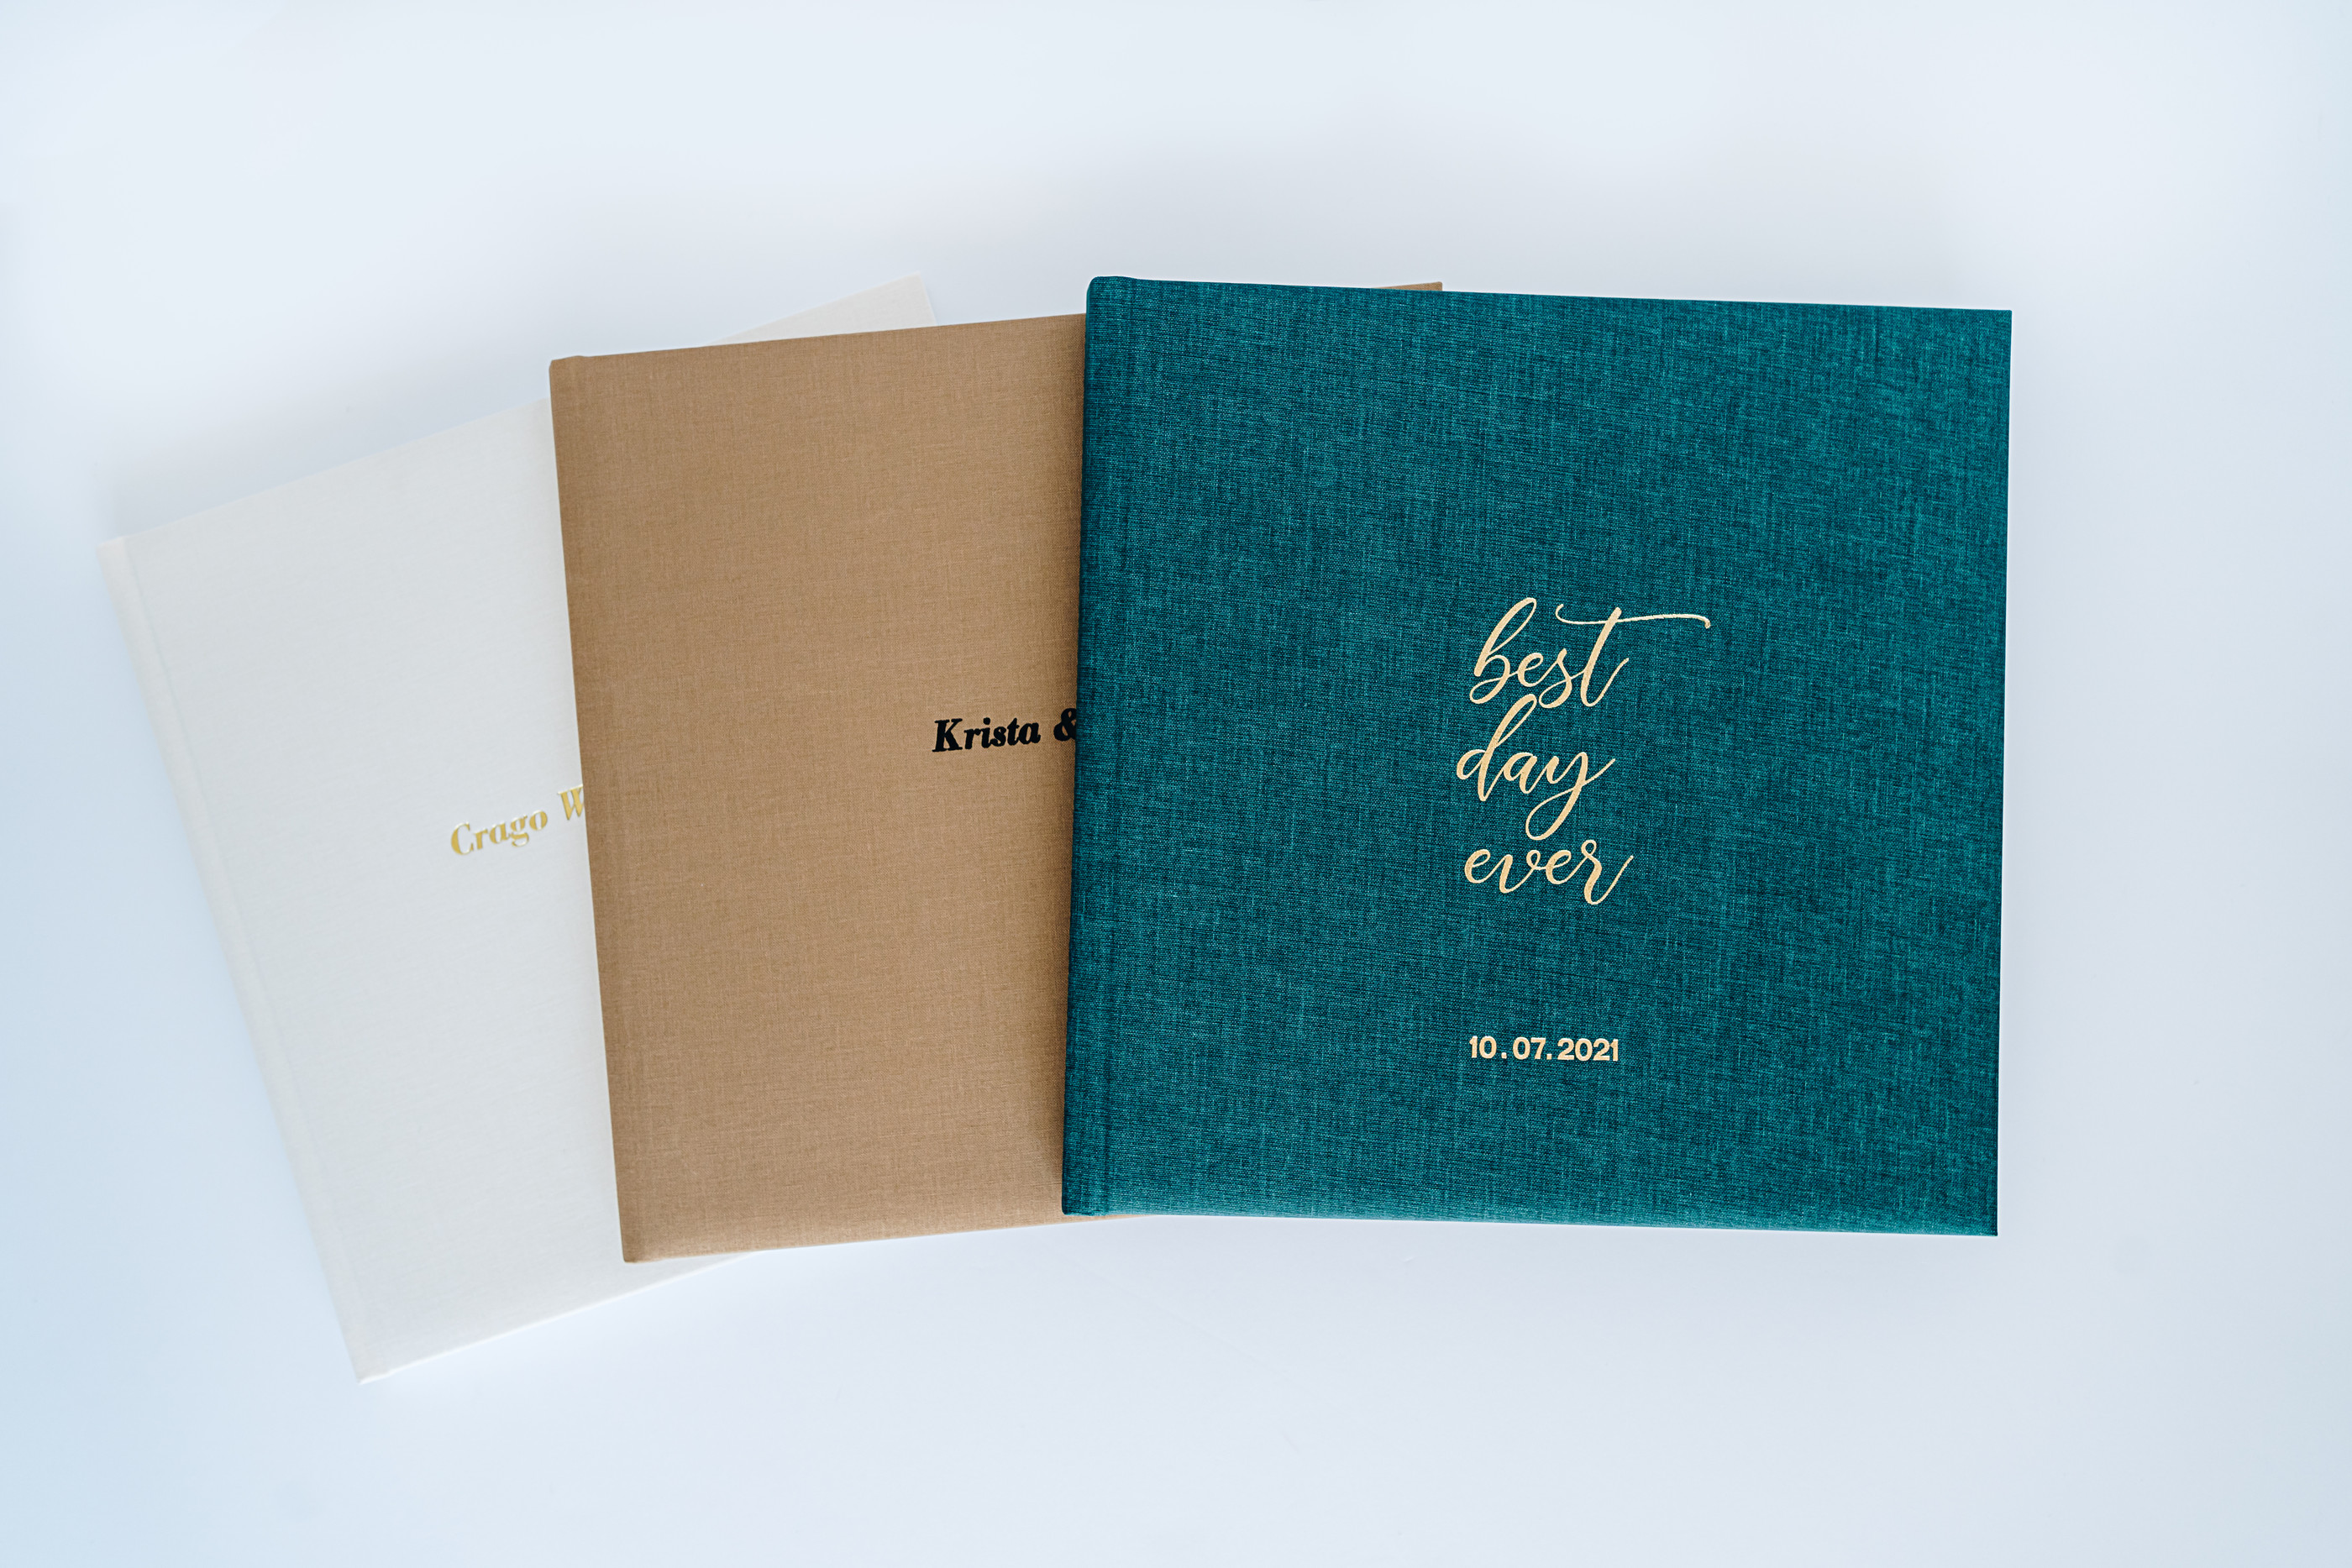 linen photo album covers with embossed titles